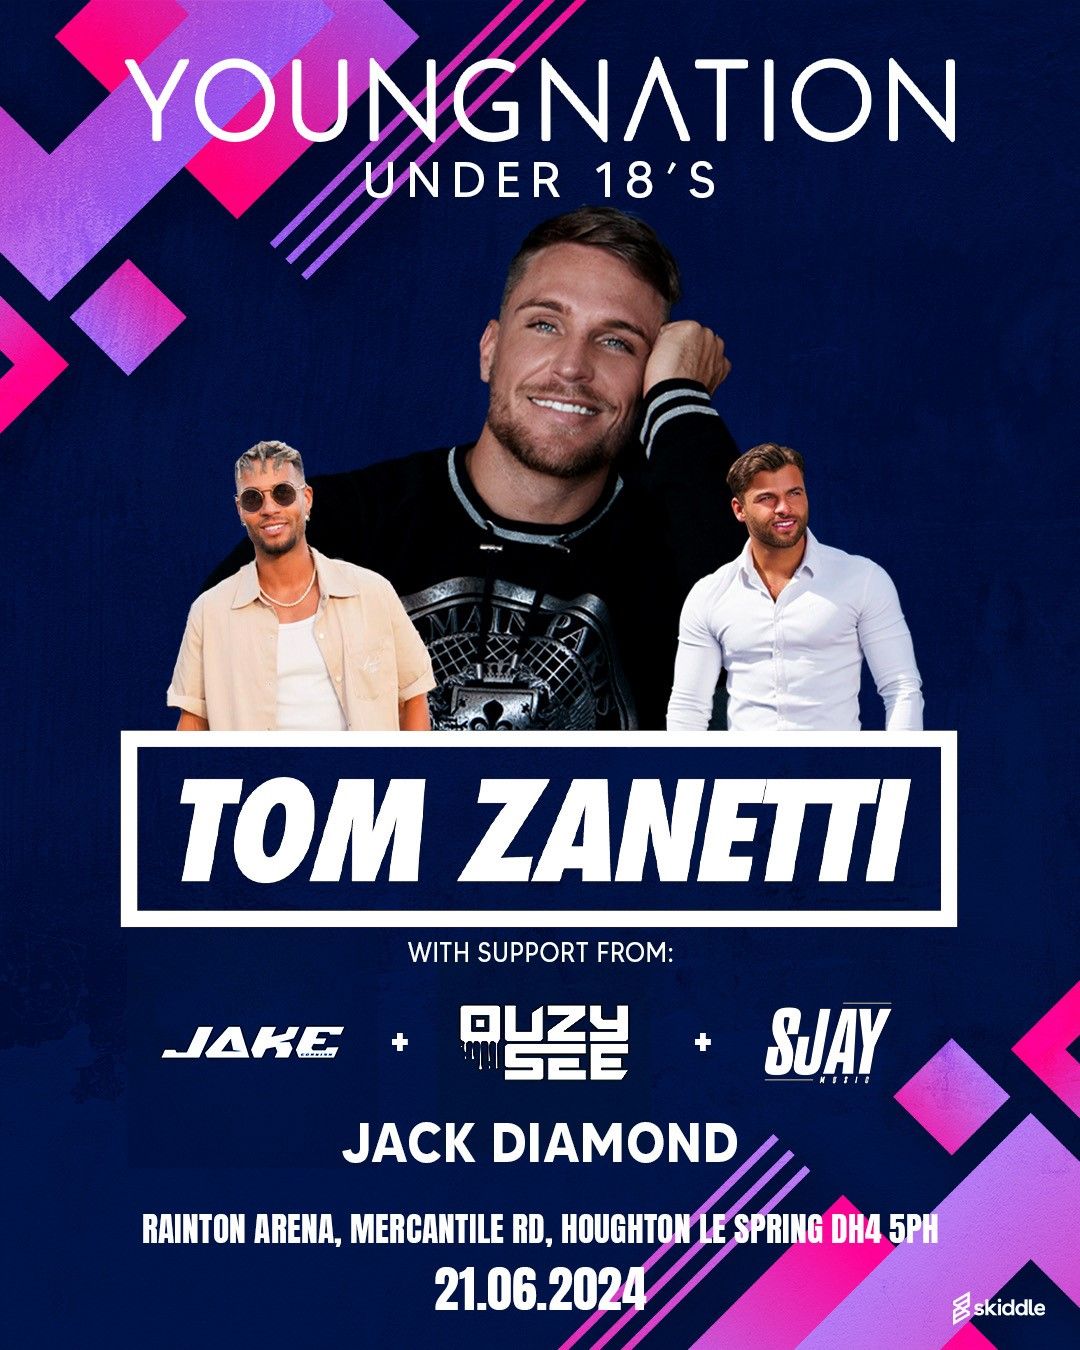 Young Nation Under 18s presents Tom Zanetti & Friends